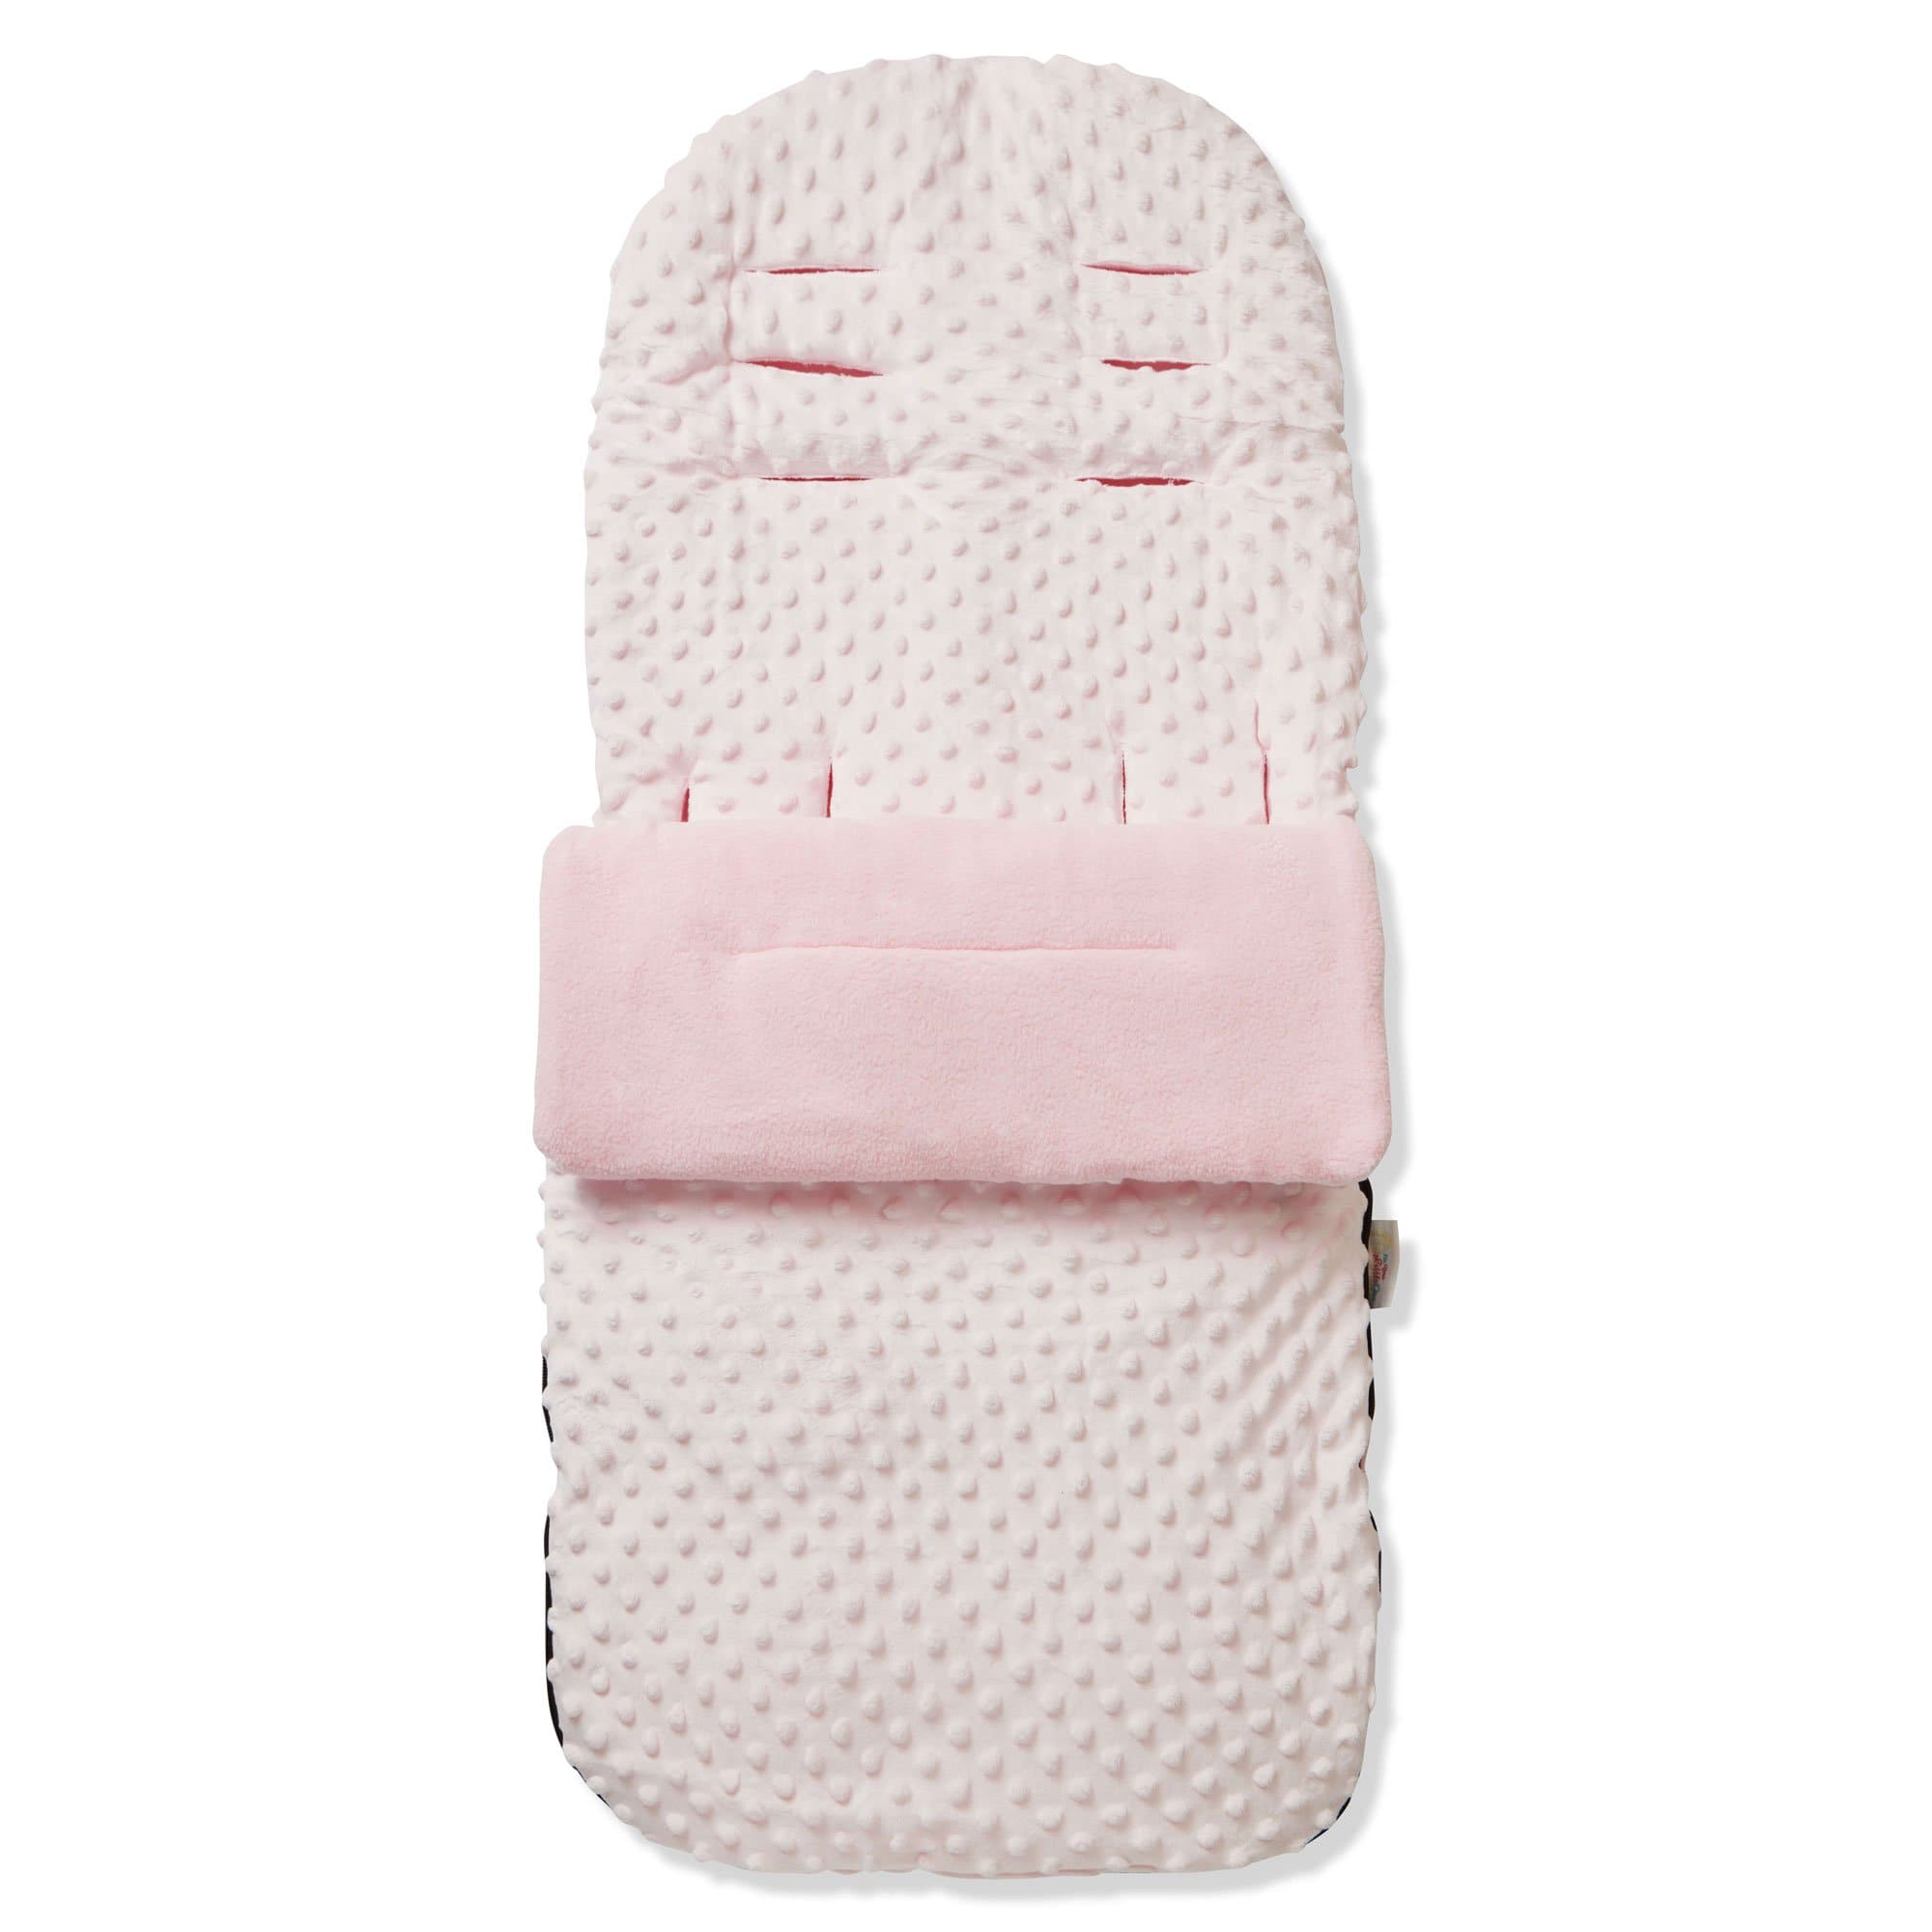 Dimple Footmuff / Cosy Toes Compatible with Peg Perego - For Your Little One